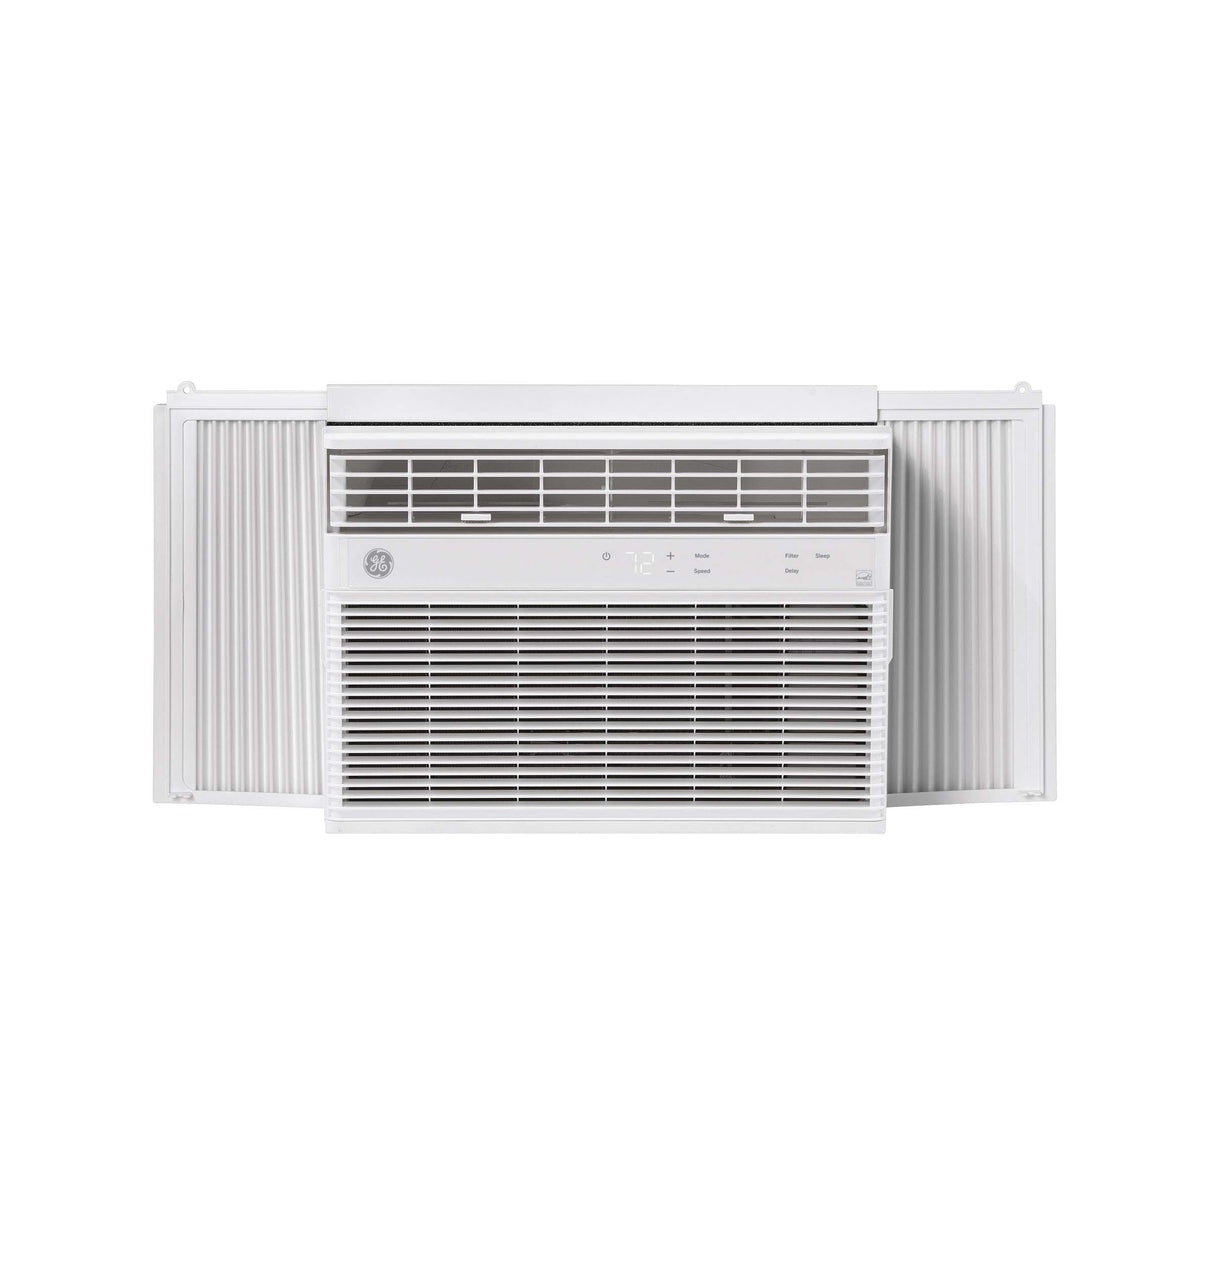 GE(R) 8,000 BTU Heat/Cool Electronic Window Air Conditioner for Medium Rooms up to 350 sq. ft. - (AHE08AZ)